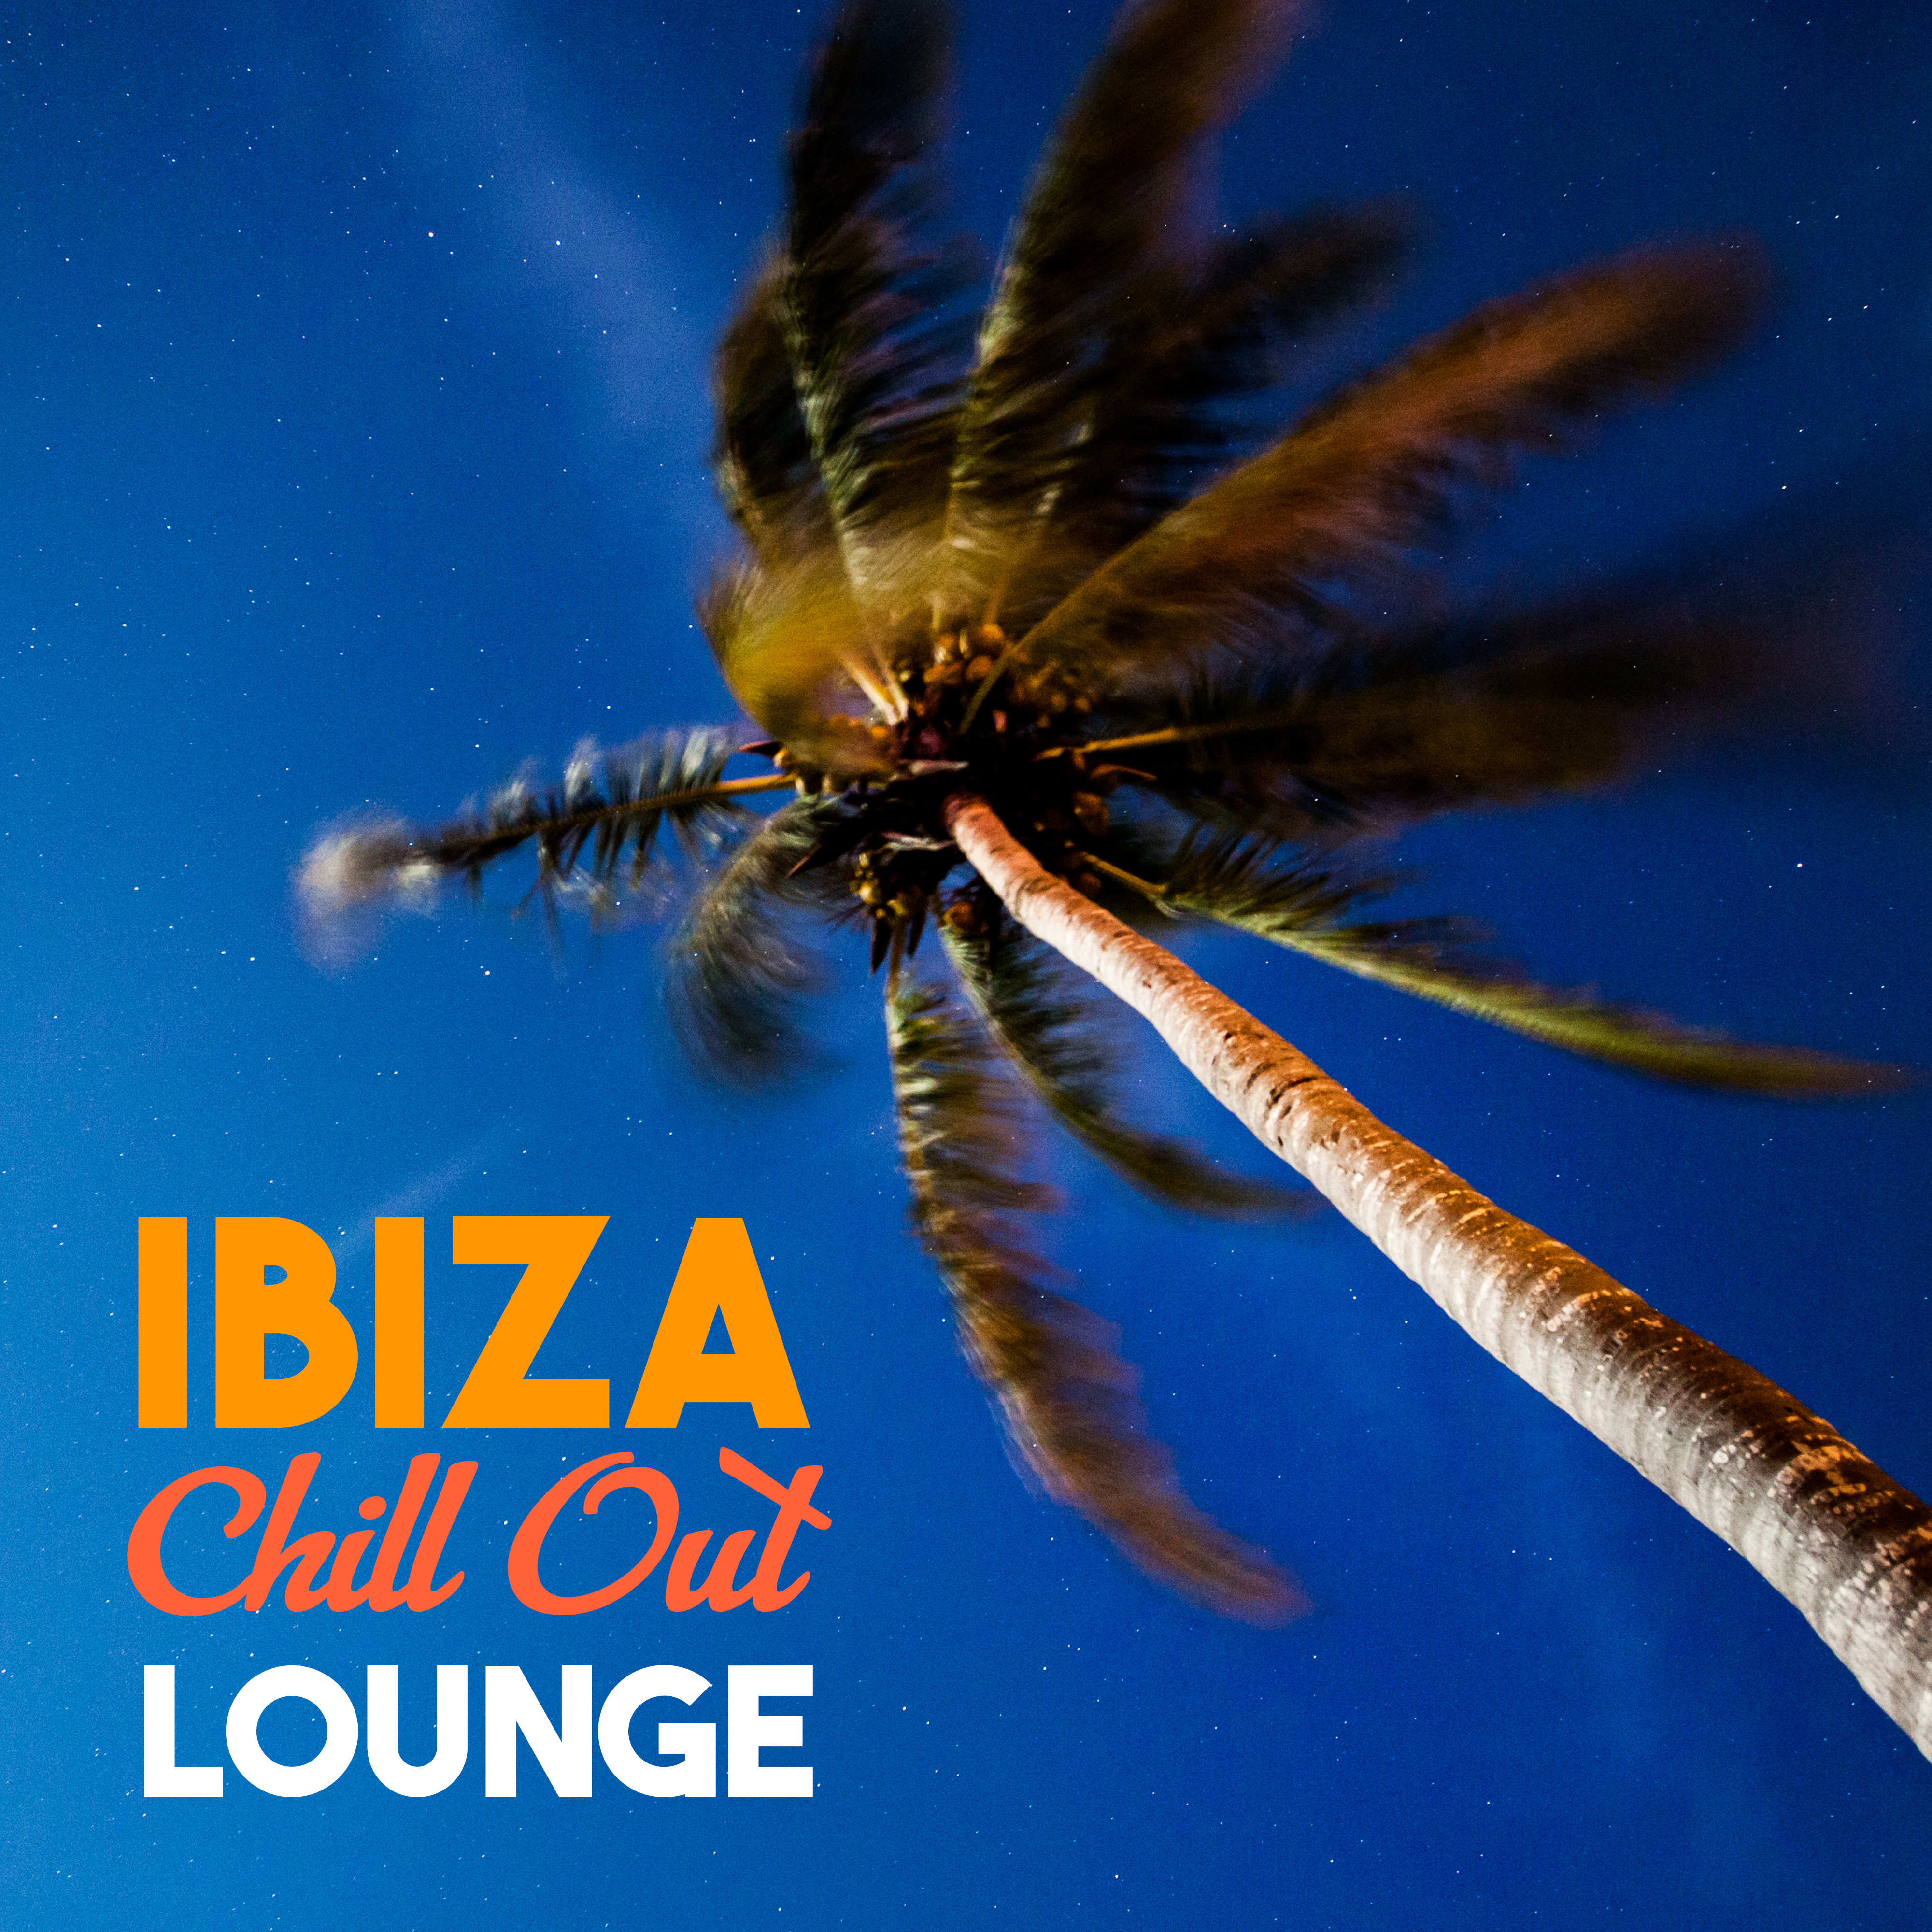 Ibiza Chill Out Lounge – Soft Music for Ibiza Relaxation, Summer Sun, Best Chill Out Music